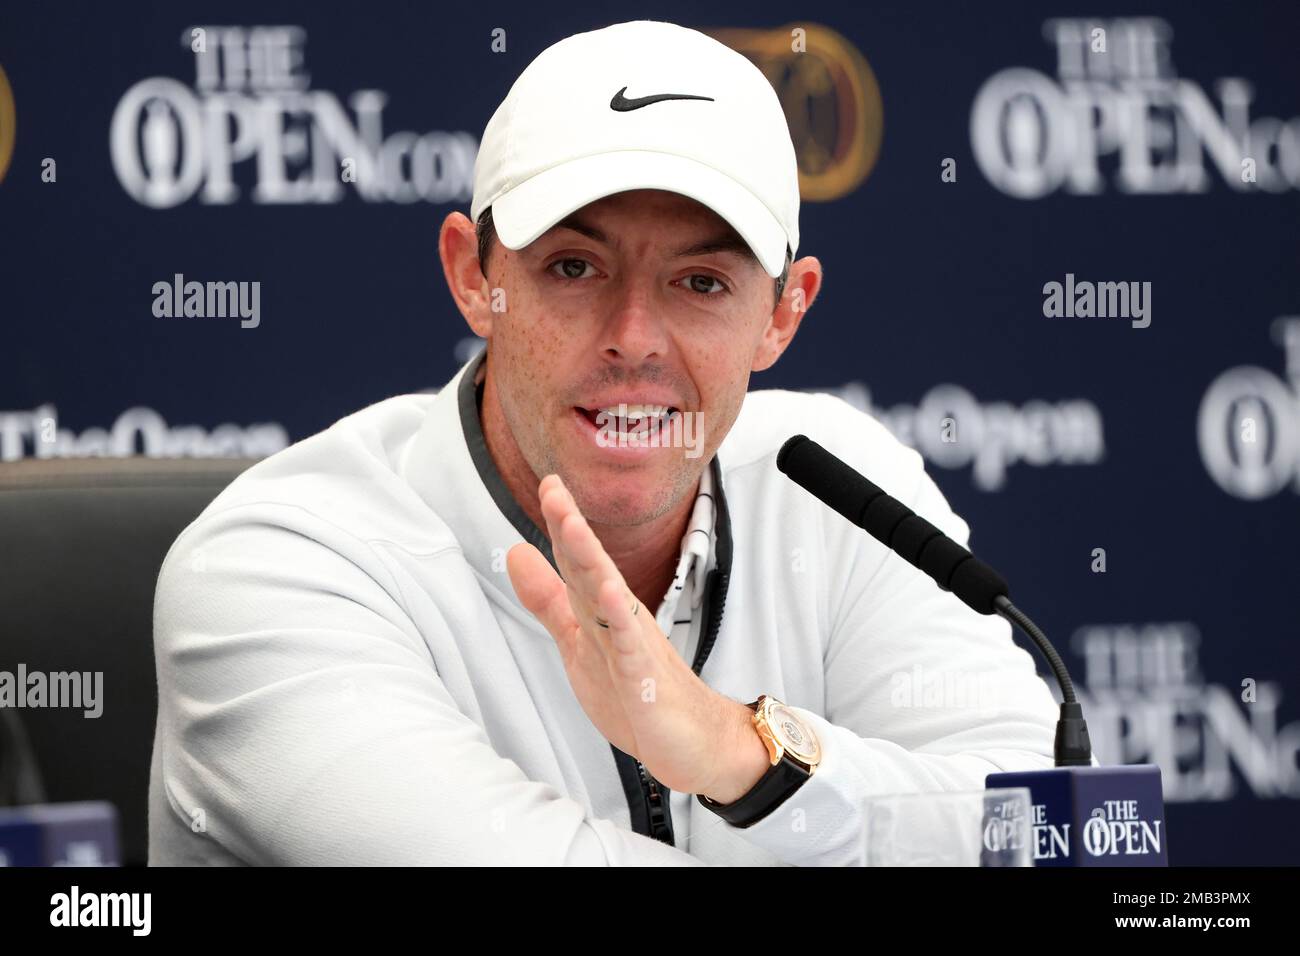 Northern Irelands golfer Rory Mcilroy gestures during a press conference at the British Open golf championship in St Andrews, Scotland, Tuesday, July 12, 2022